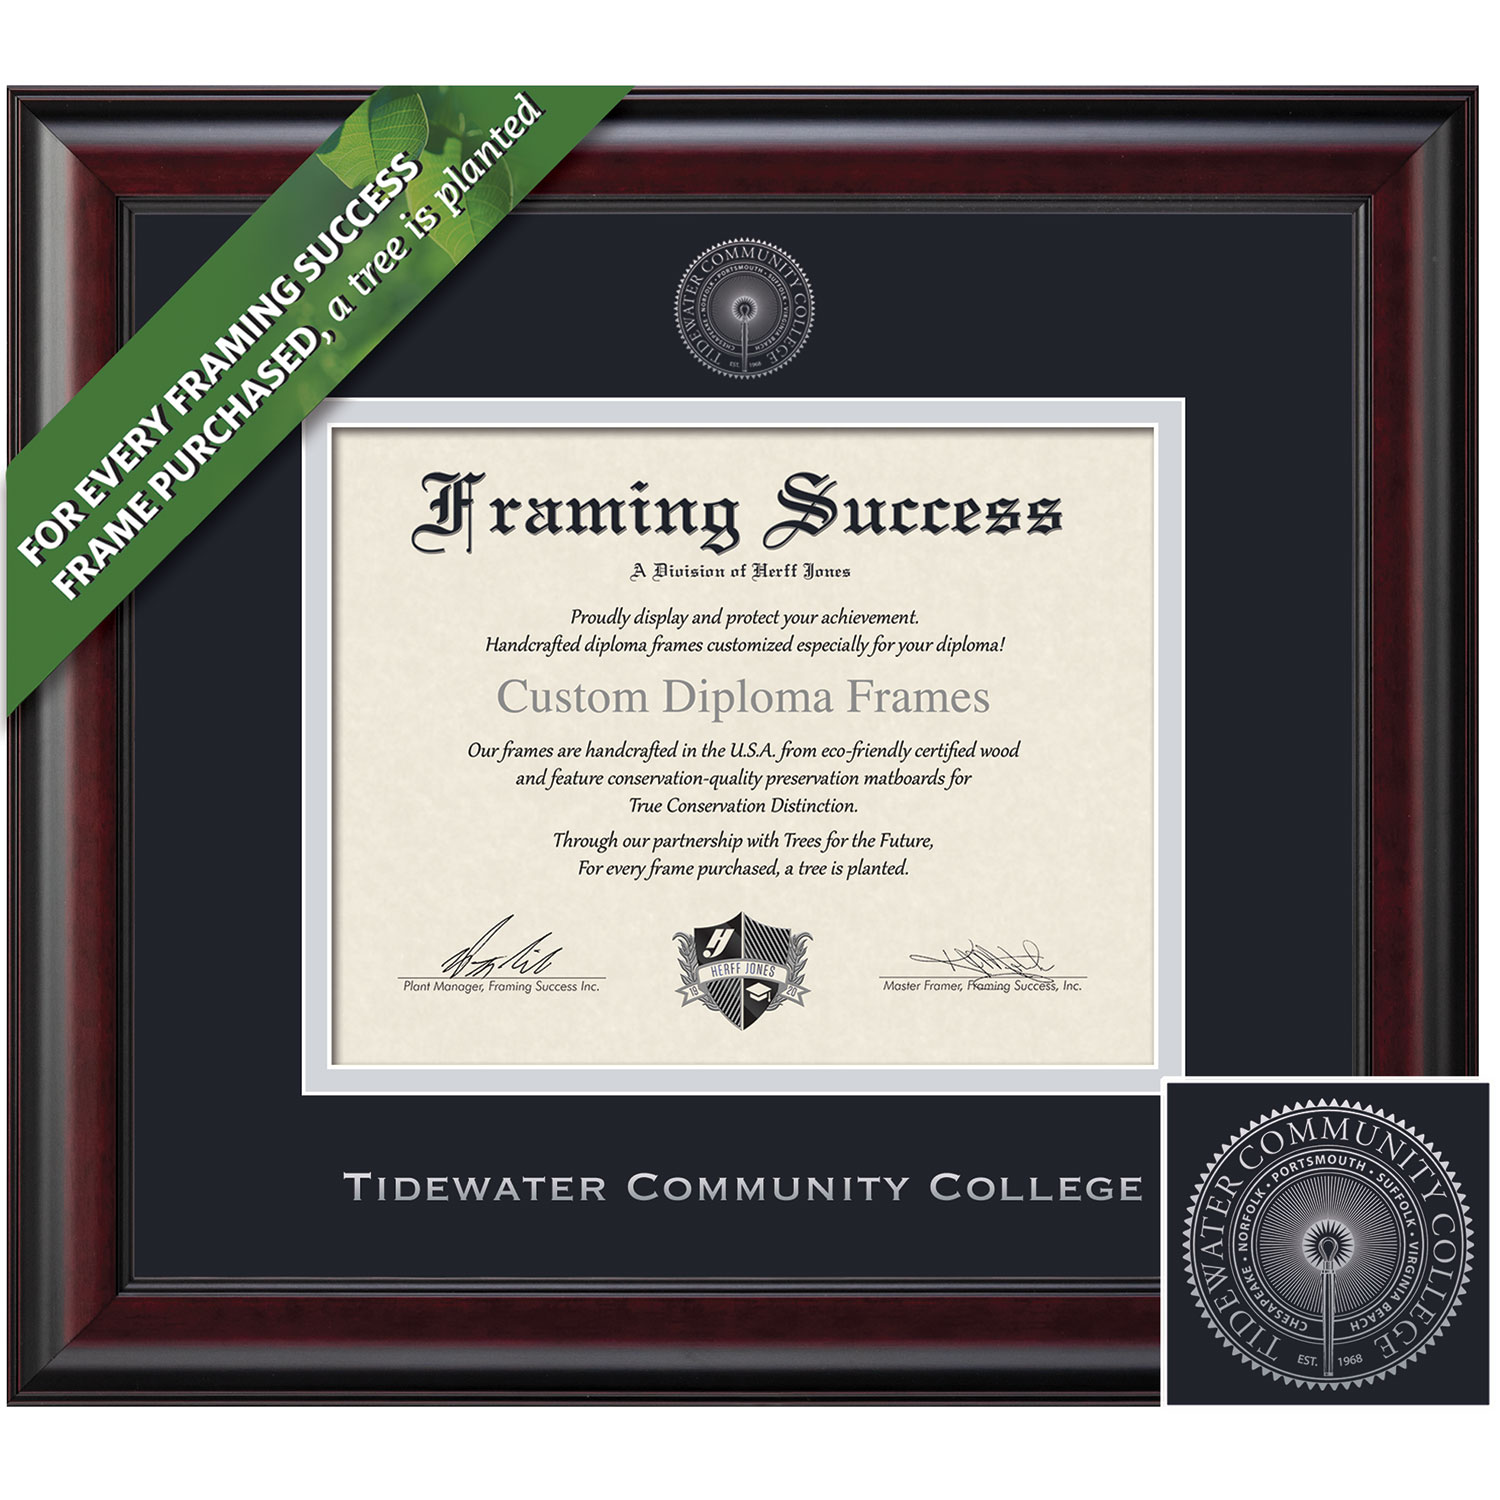 Framing Success 8.5 x 11 Silver Embossed Seal Classic Associates Diploma Frame.